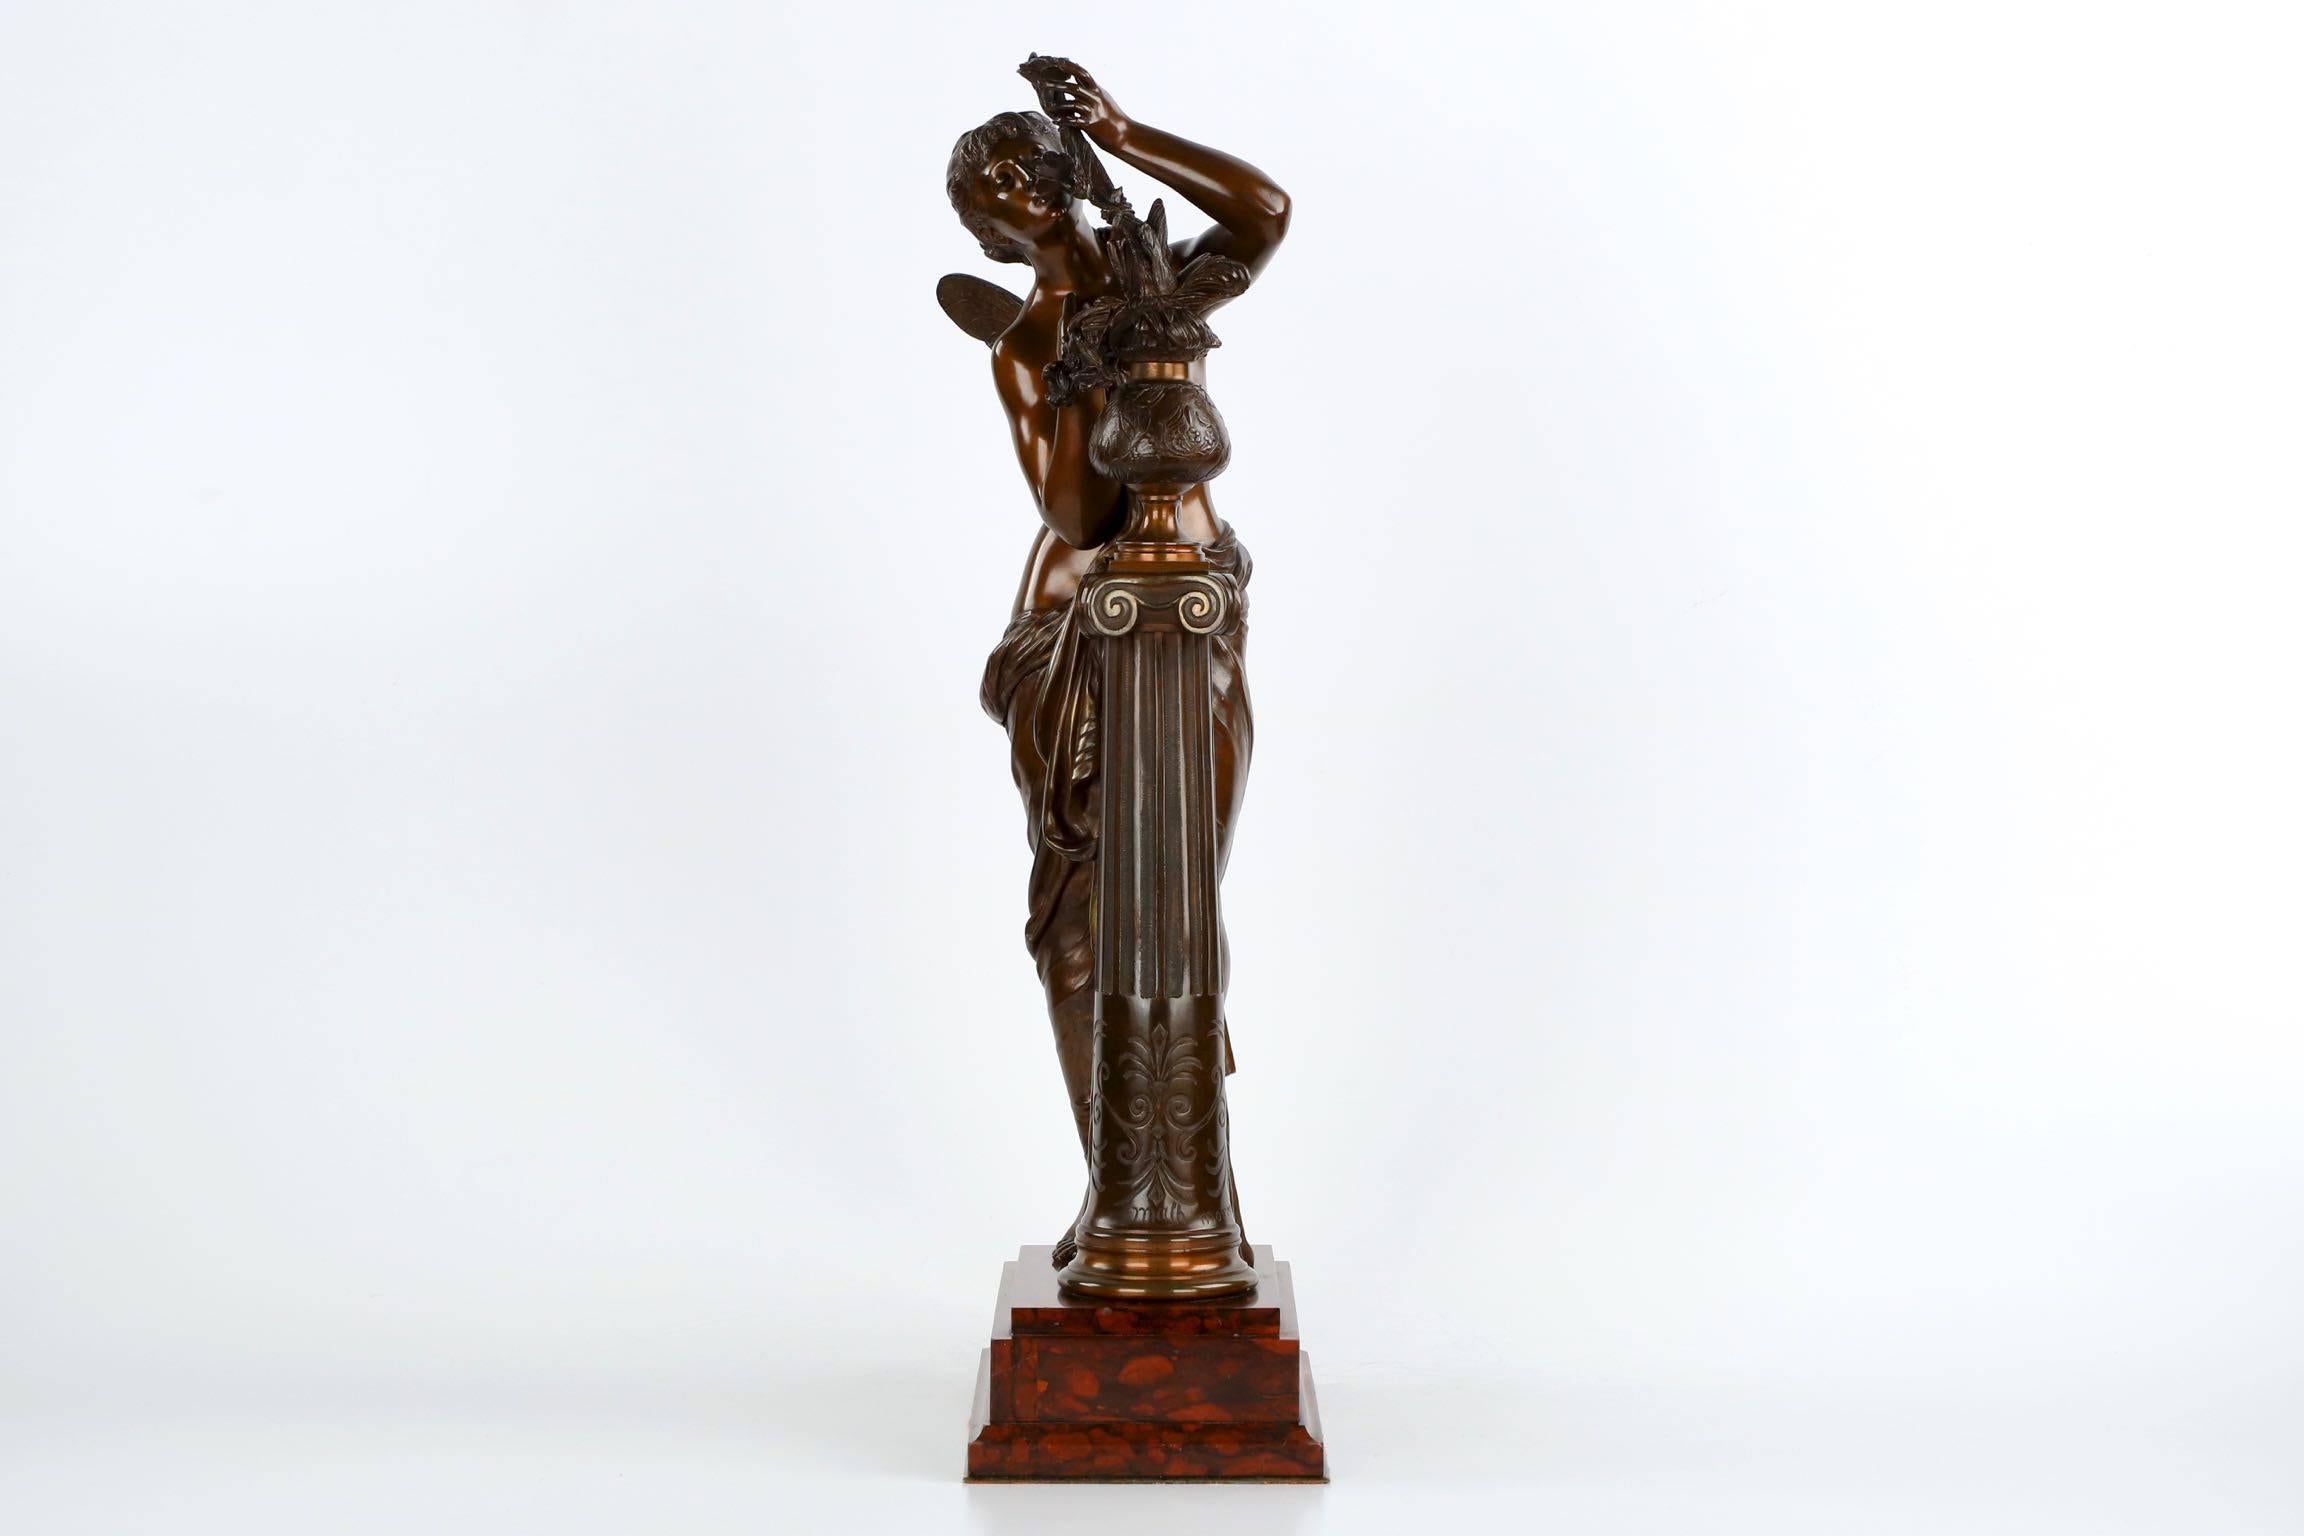 French Fine Authentic Bronze Sculpture of L'aurore by Mathurin Moreau, circa 1880